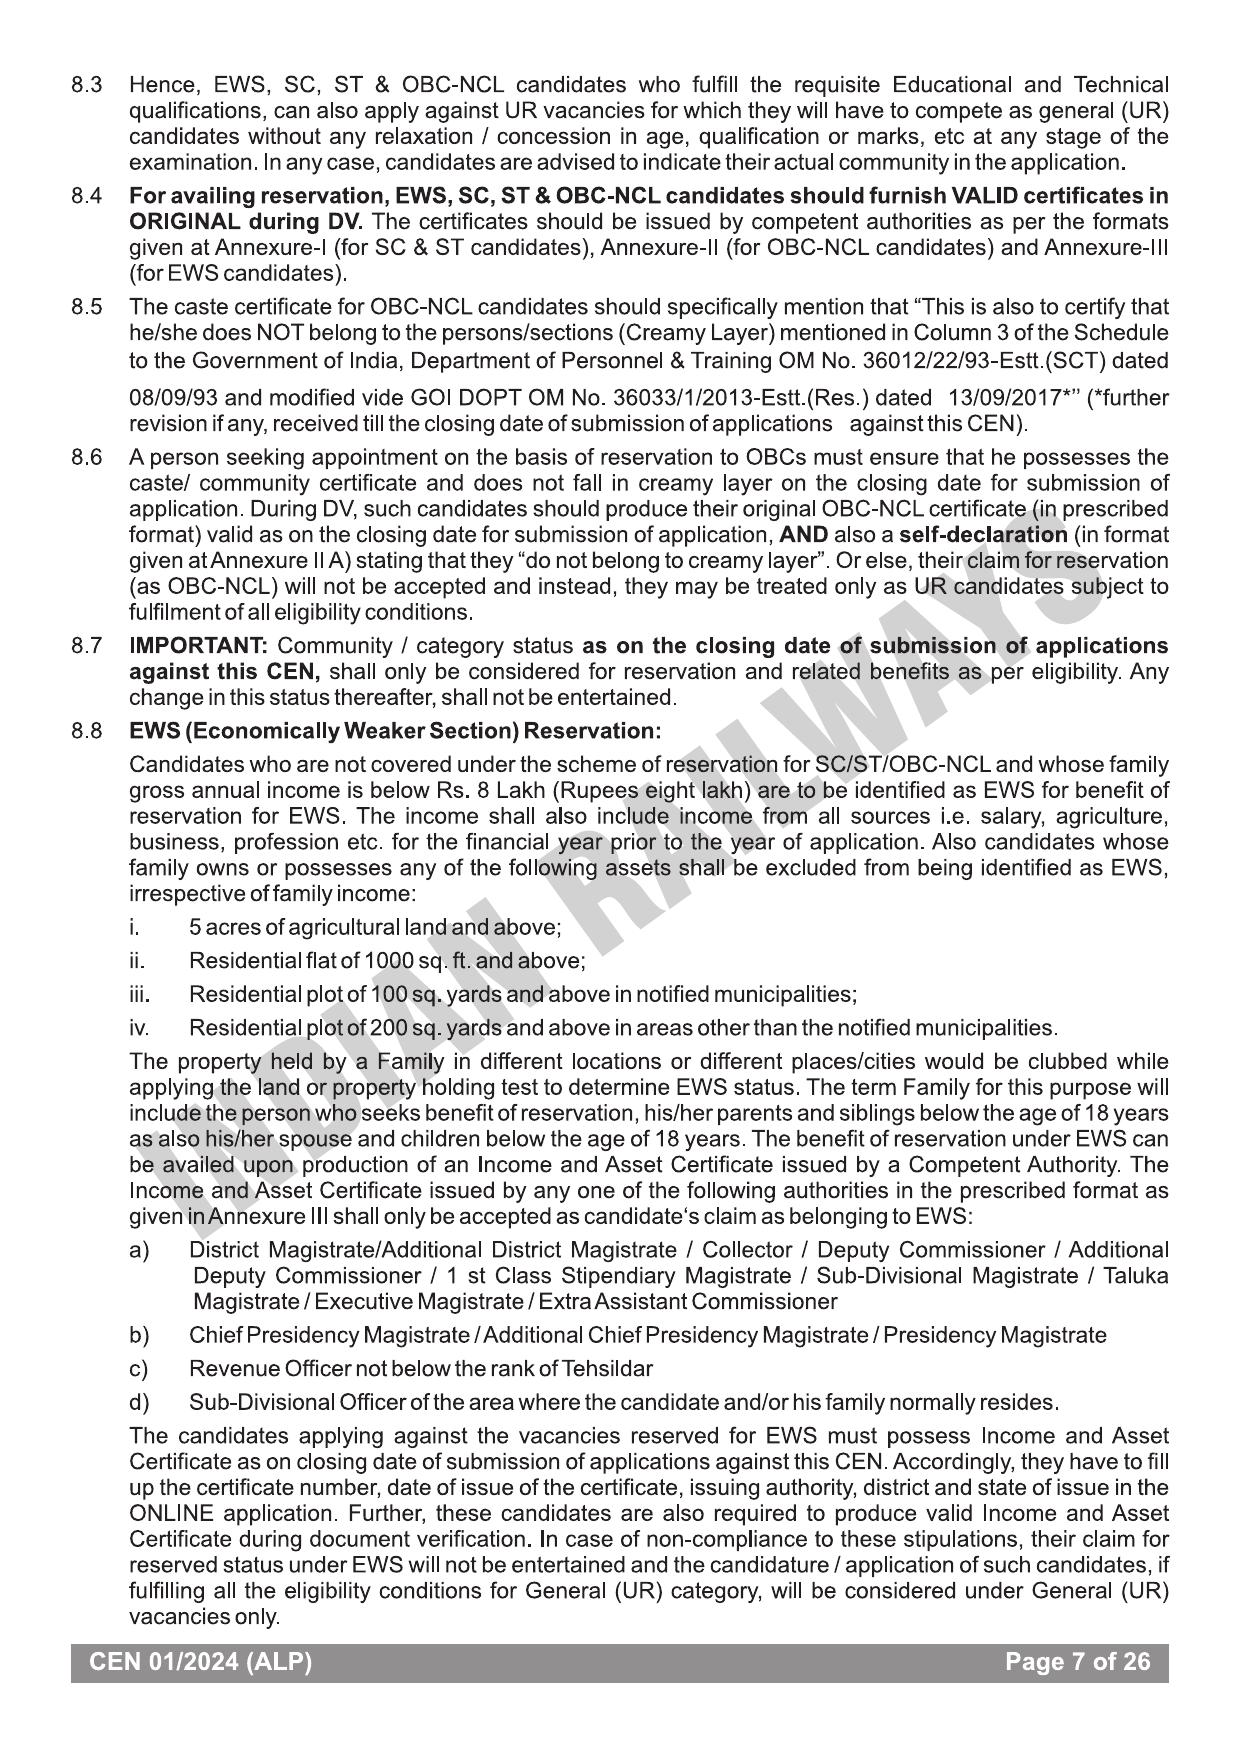 RRB ALP Recruitment 2024 Notification: Railways Assistant Loco Pilot Eligibility, Salary - Page 8